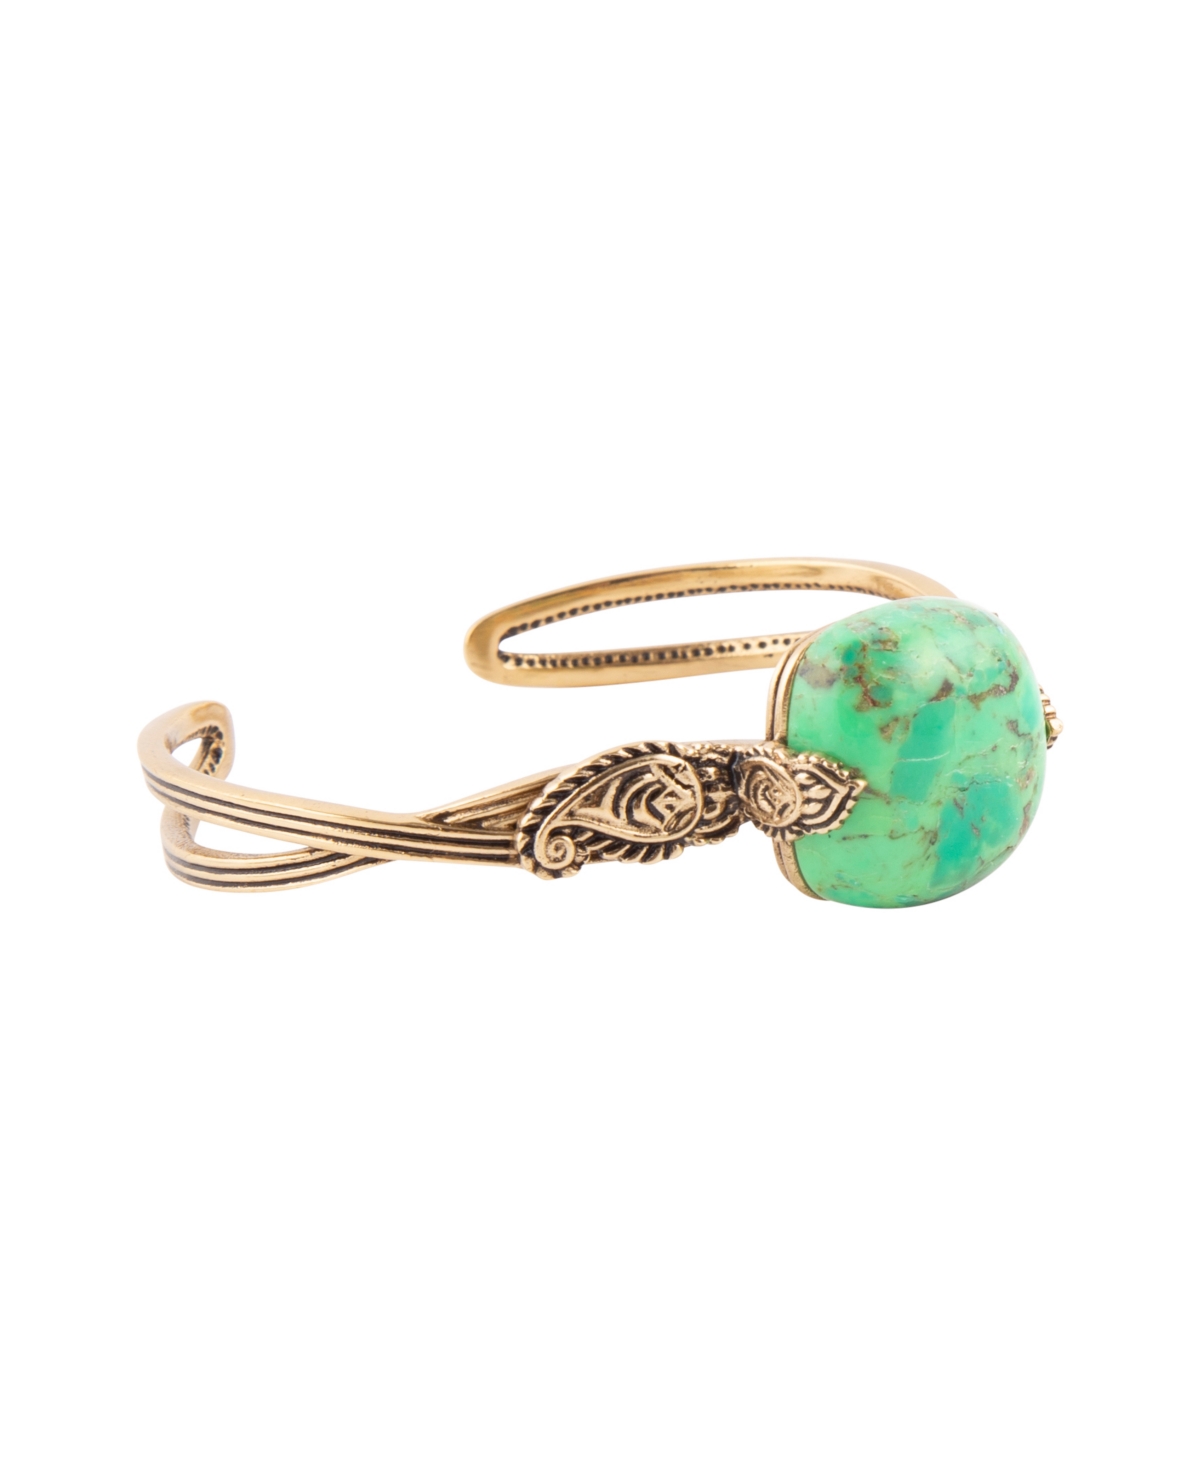 Barse Ornate Bronze and Genuine Lime Turquoise Cuff Bracelet